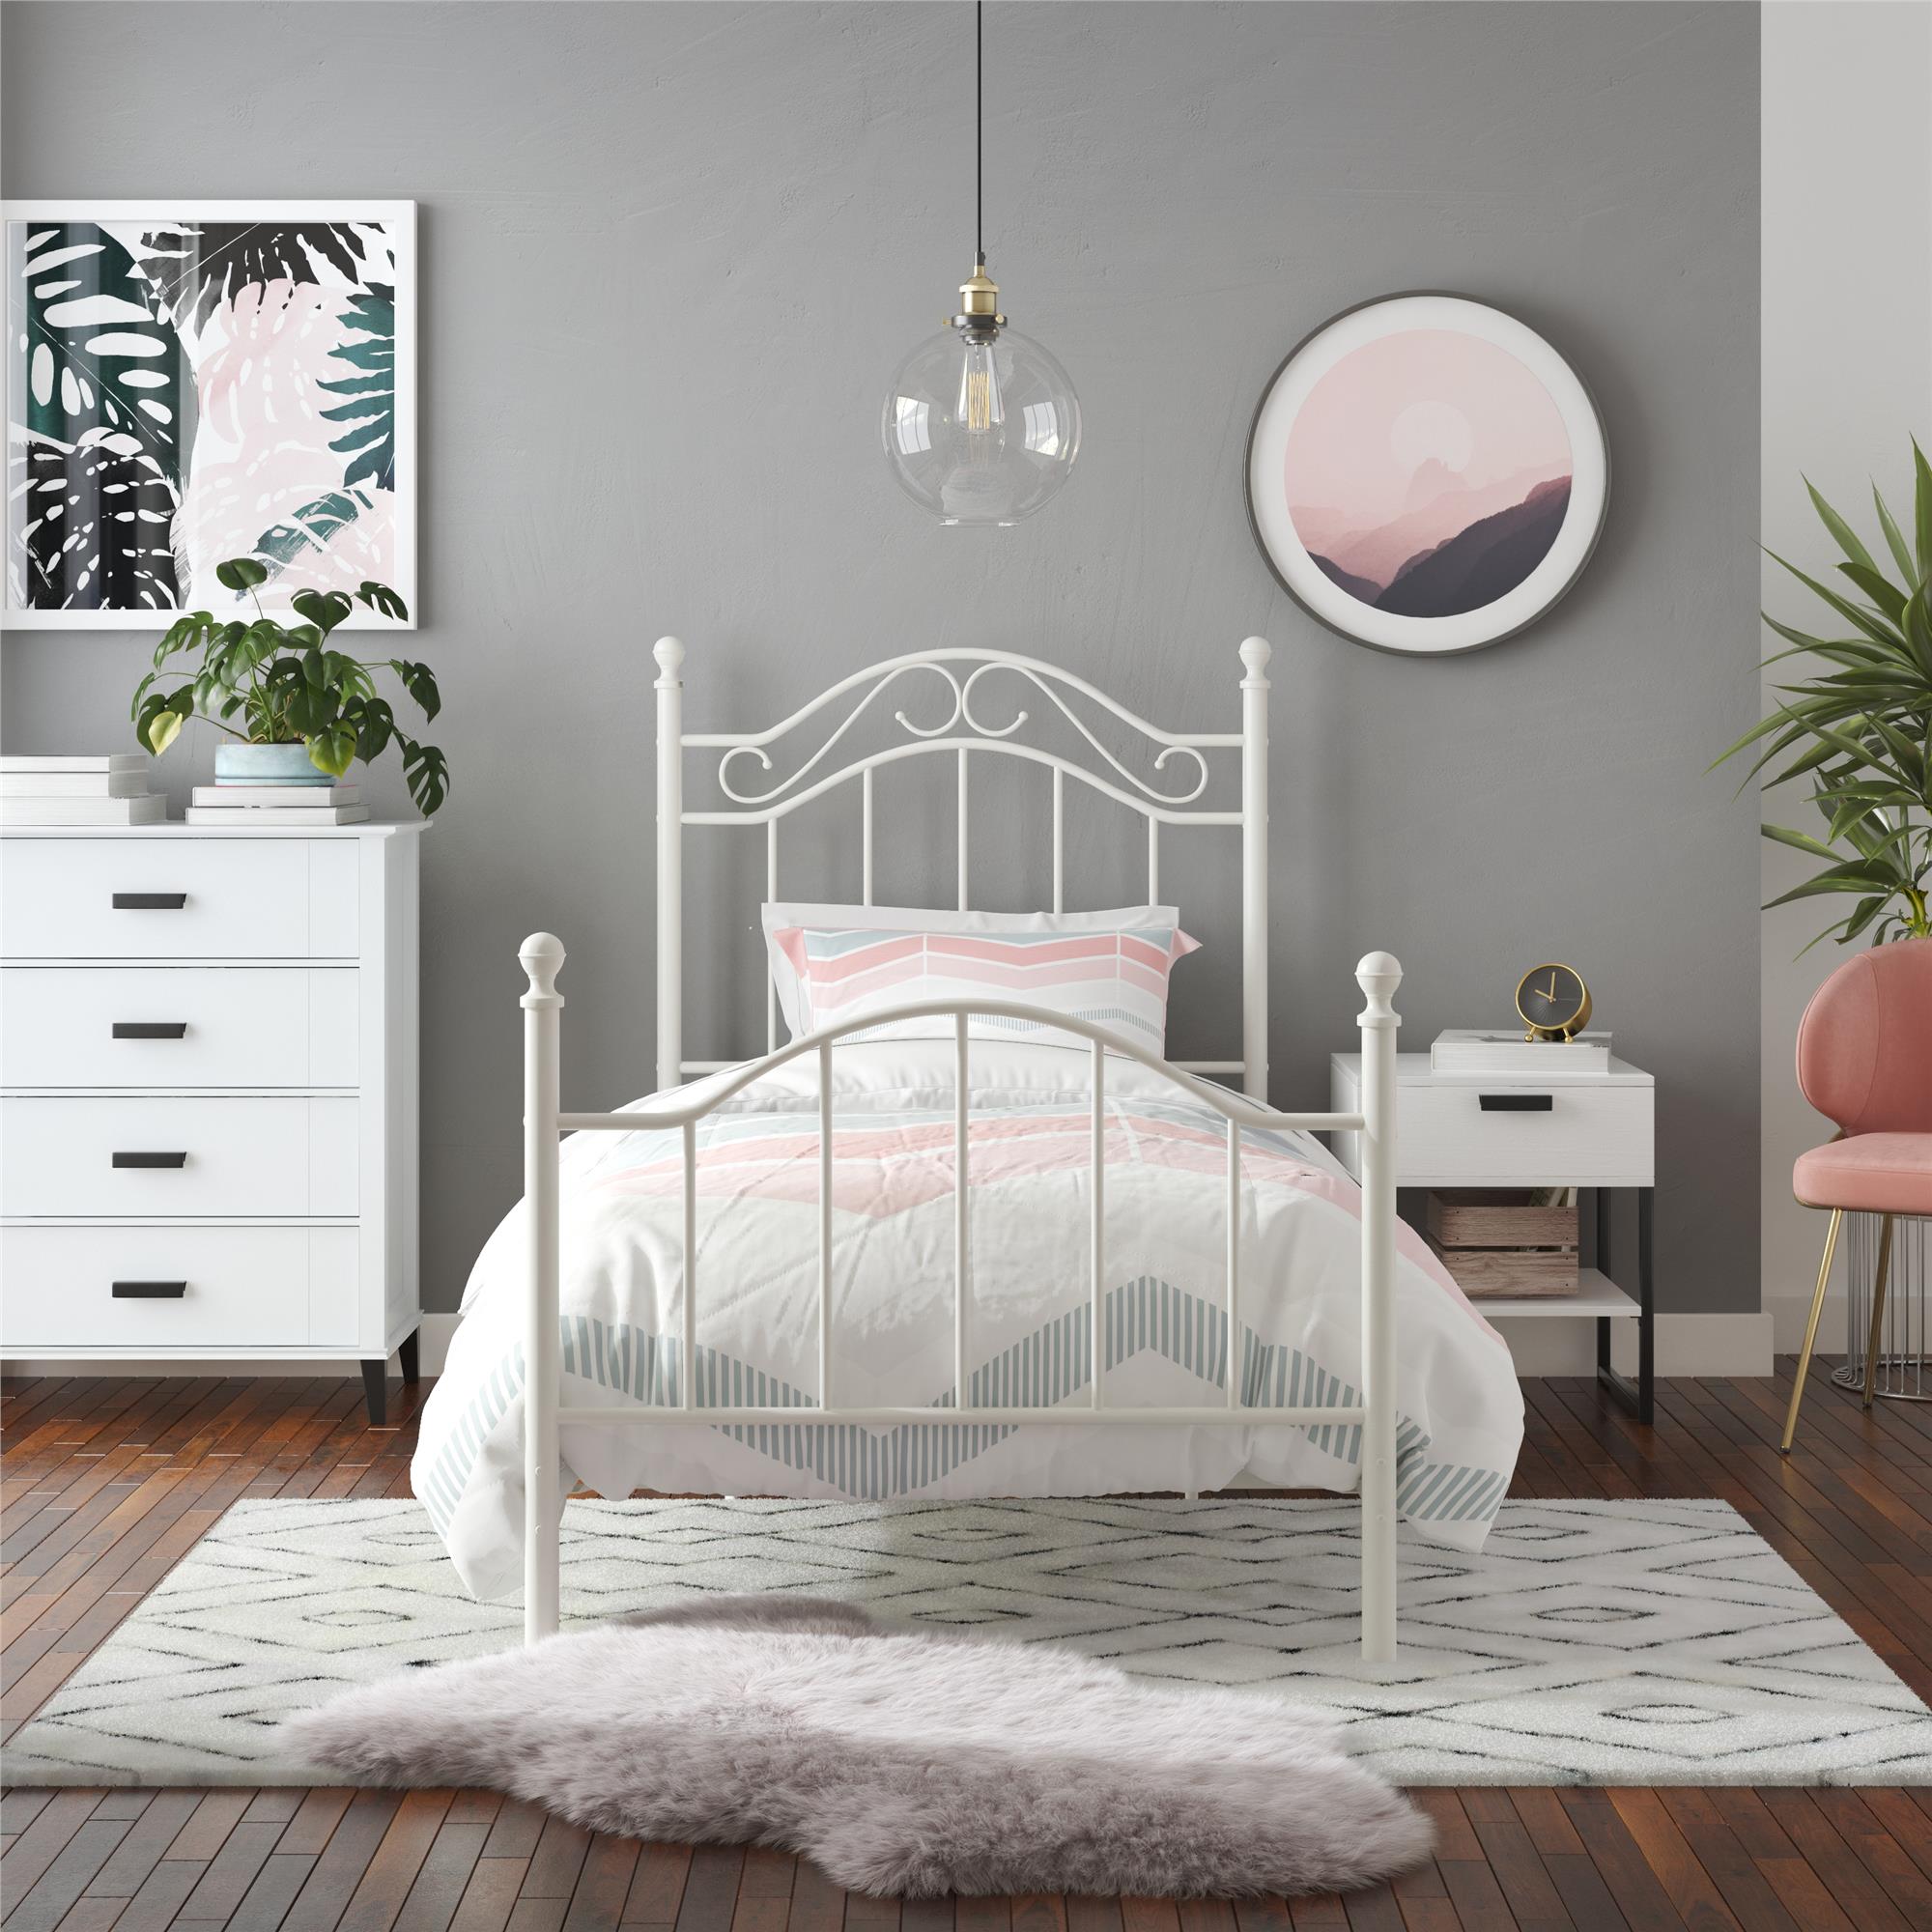 Mainstays Metal Bed, Bedroom Furniture, Twin Size Frame, White - image 1 of 16